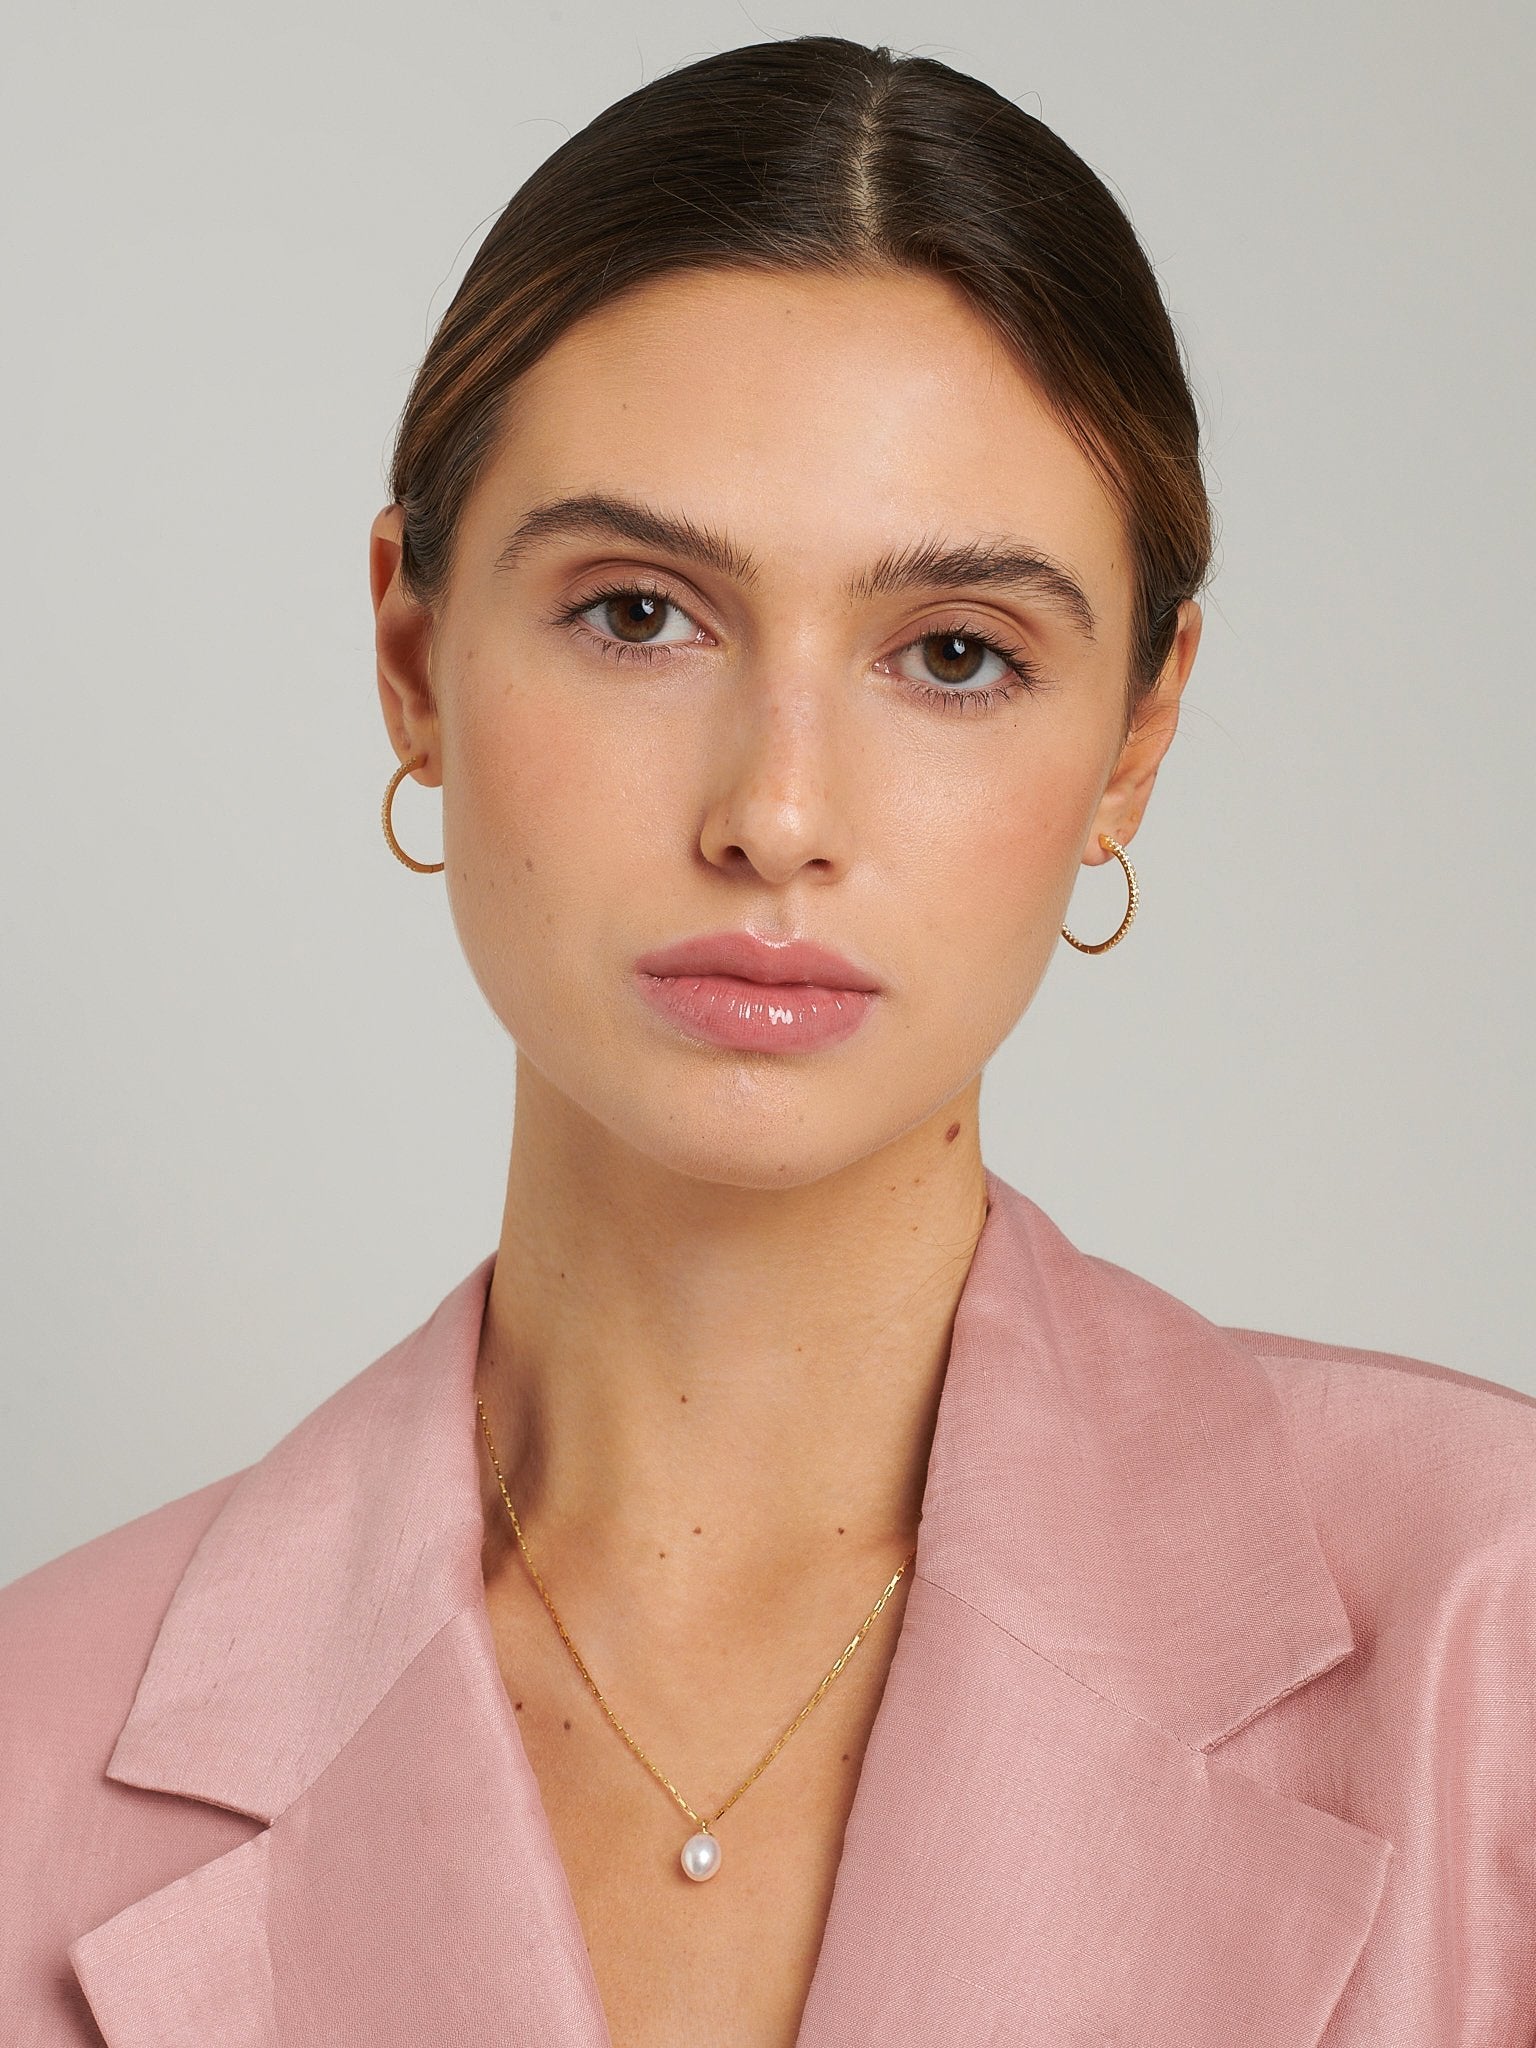 Female model wearing a pink blazer with a gold pendant necklace.